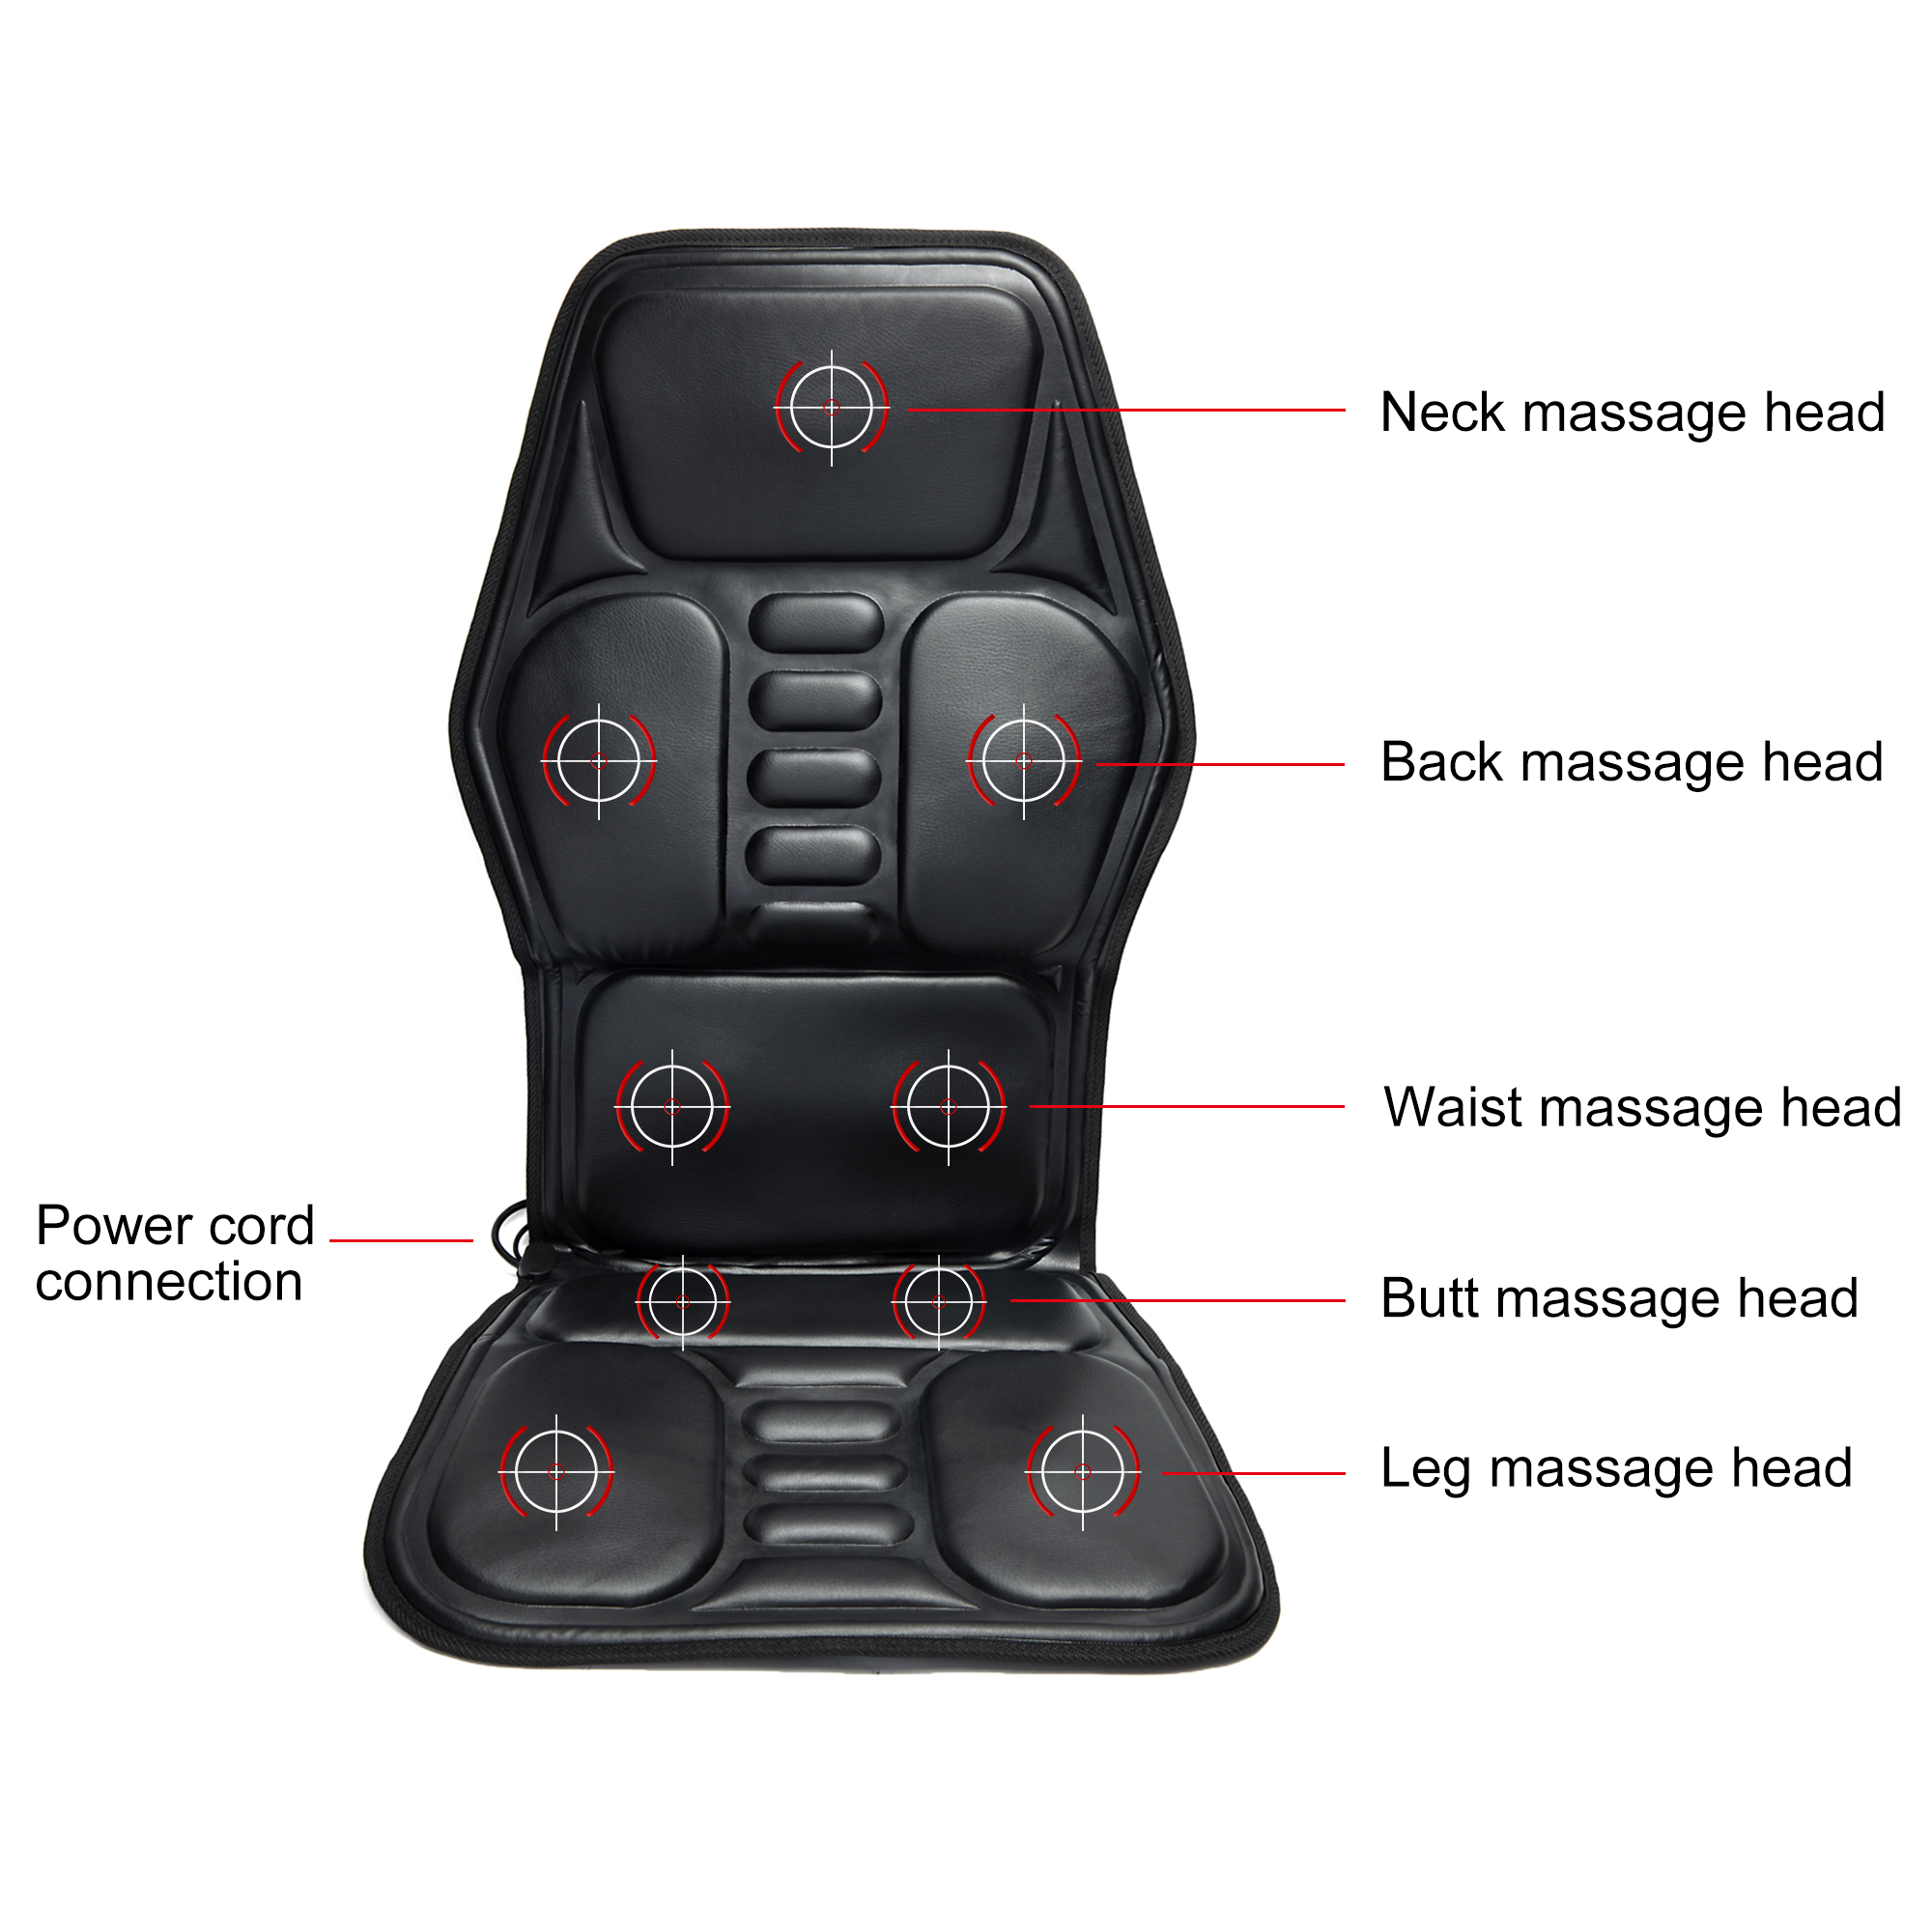 SHCKE Shiatsu Massage Seat Cushion with Heat and 3D Deep Kneading Ressing Rolling and Vibrating Full Back Massager Chair Pad Pinpoint Precise Spot for Home Office - image 3 of 7